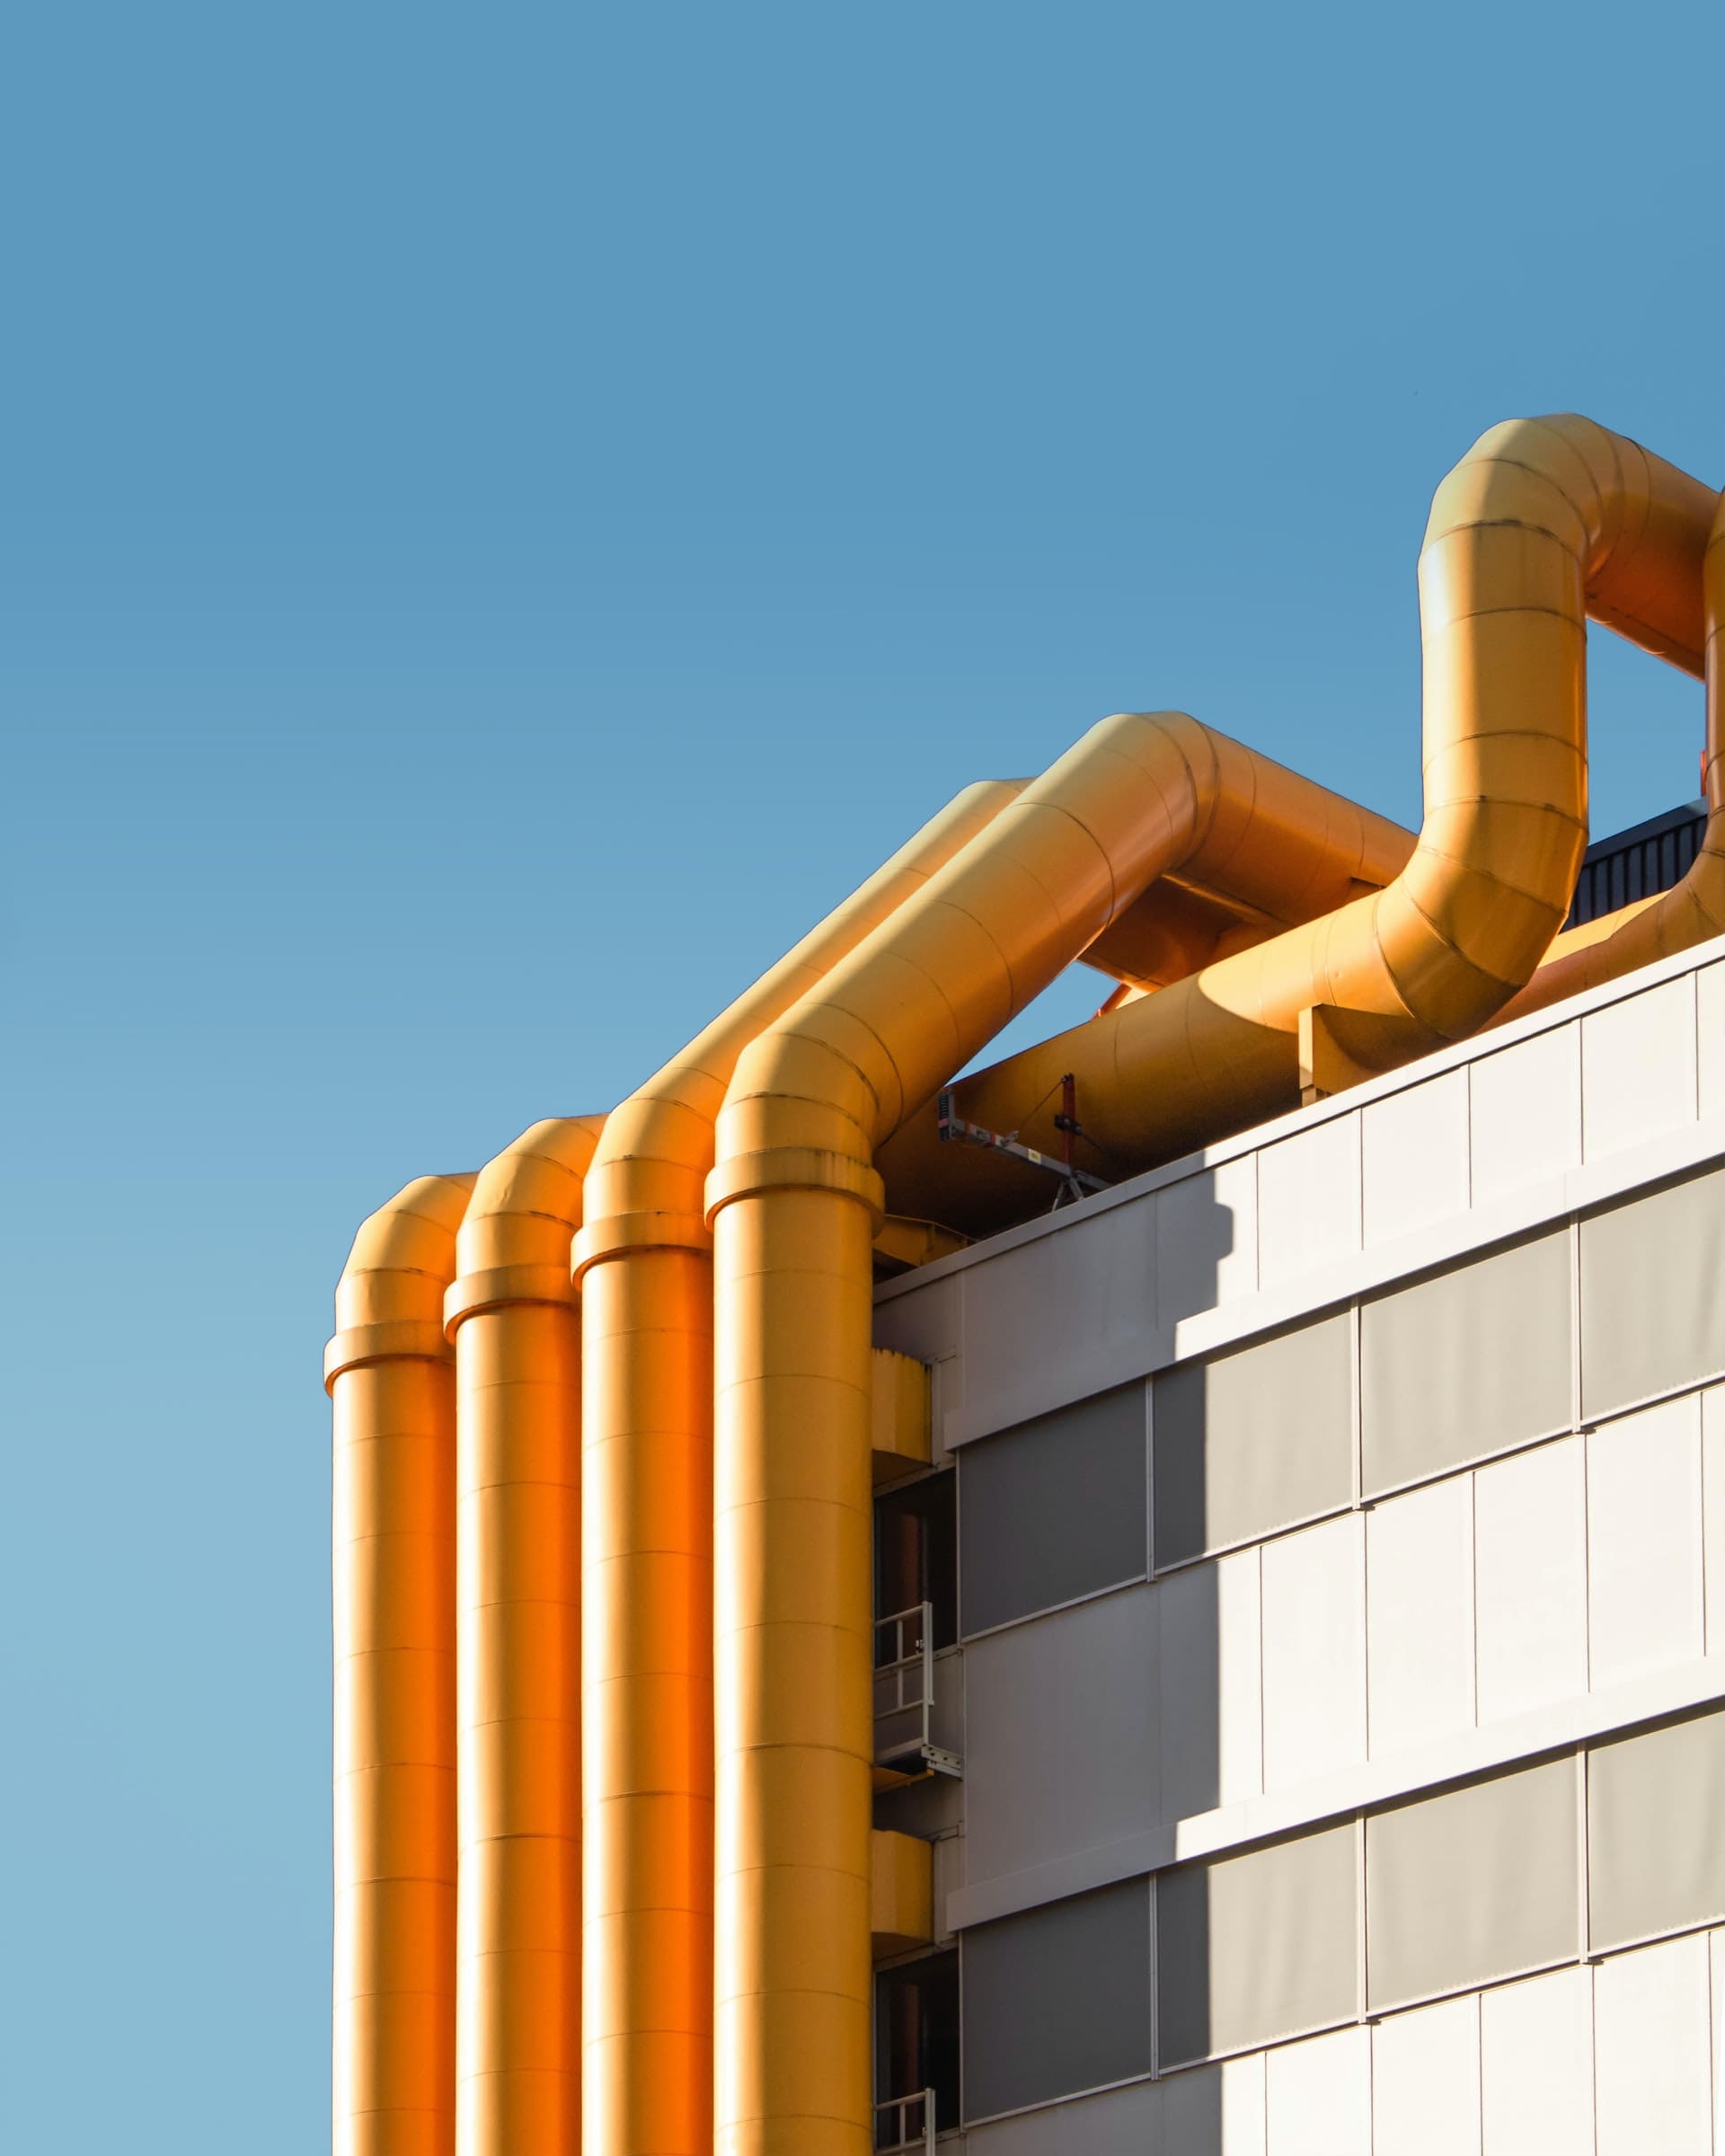 yellow commercial ventilation ducting